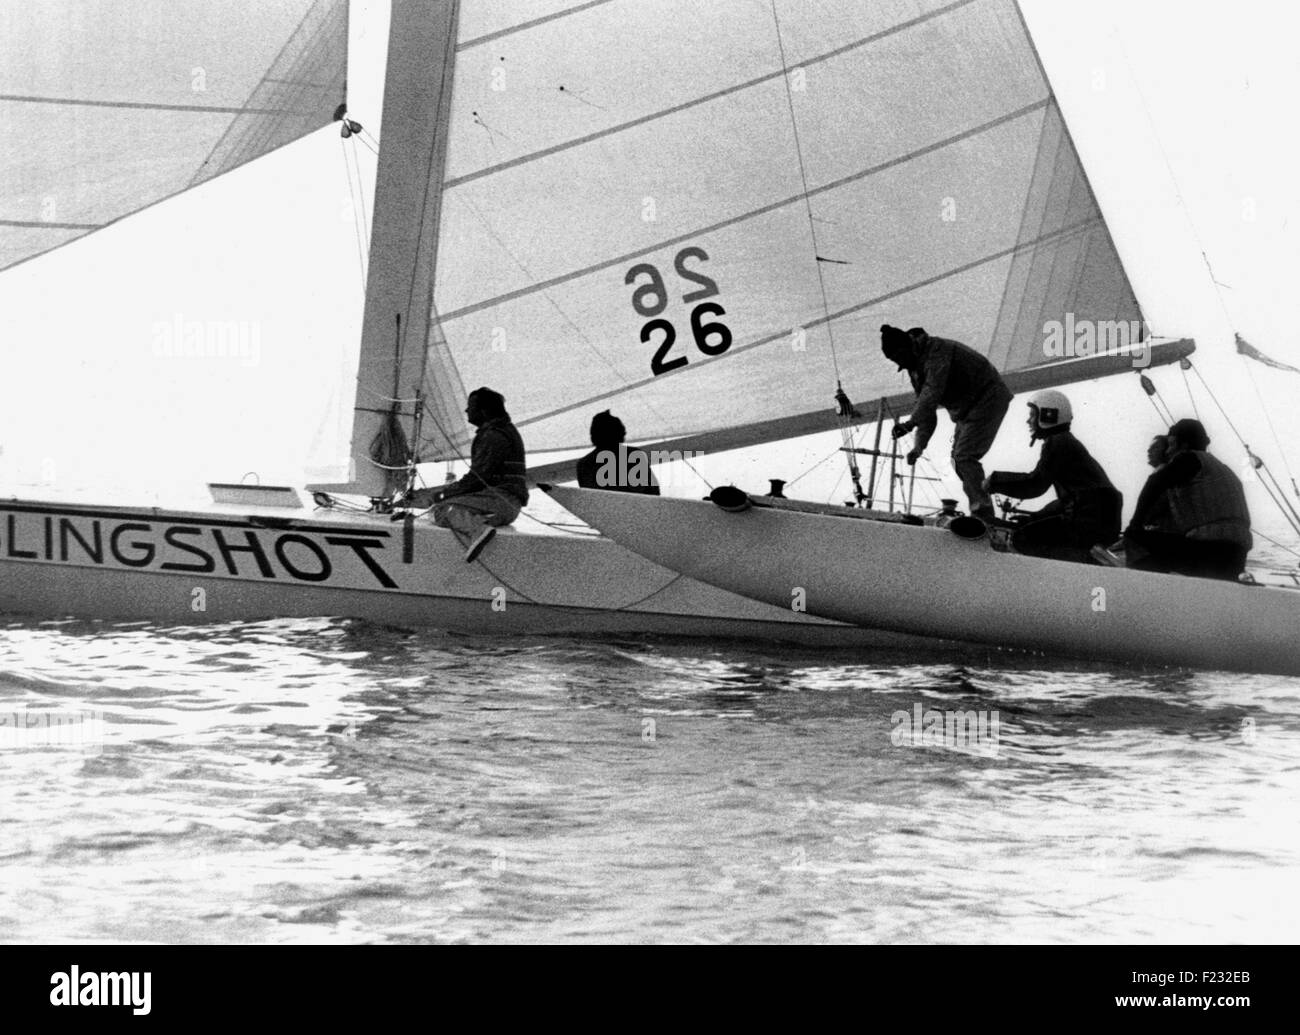 AJAX NEWS PHOTOS - 13TH OCT, 1978. WEYMOUTH,ENGLAND. - SPEED WEEK - AMERICAN SAILING SPEED CATAMARAN SLINGSHOT STARTS ANOTHER RUN. OWNER IS OLIVER CARL THOMAS OF TROY, MICHIGAN, USA.PHOTO:RICK GODLEY/AJAX  REF:1978 2 Stock Photo